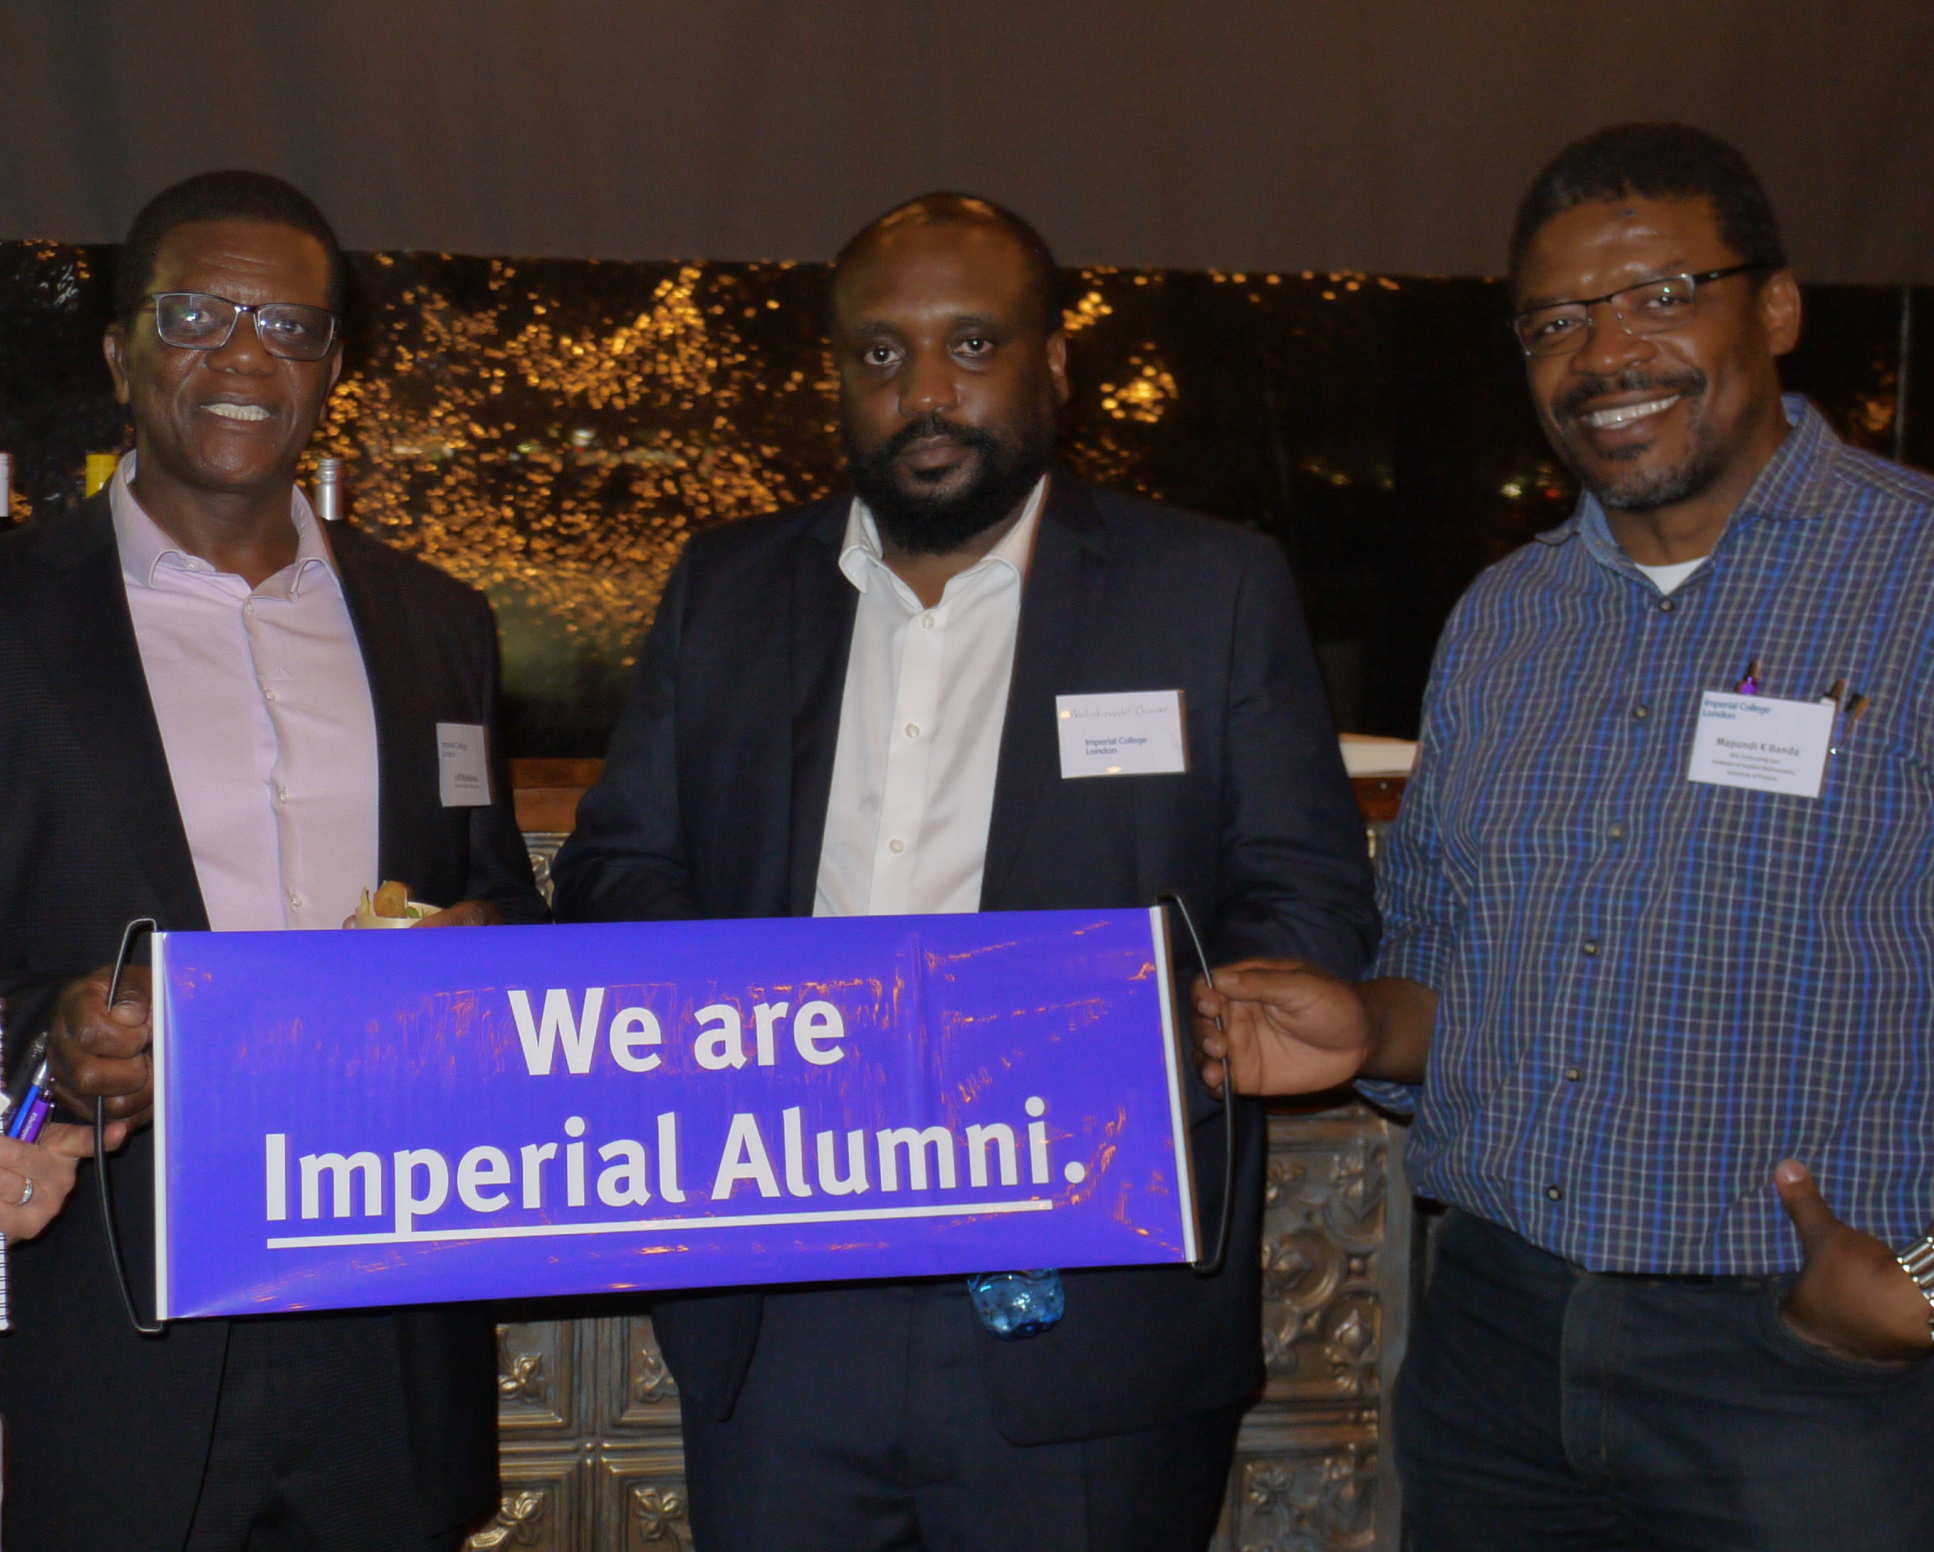 South Africa alumni gathered in Cape Town and Johannesburg to hear about Imperial's ties with the country